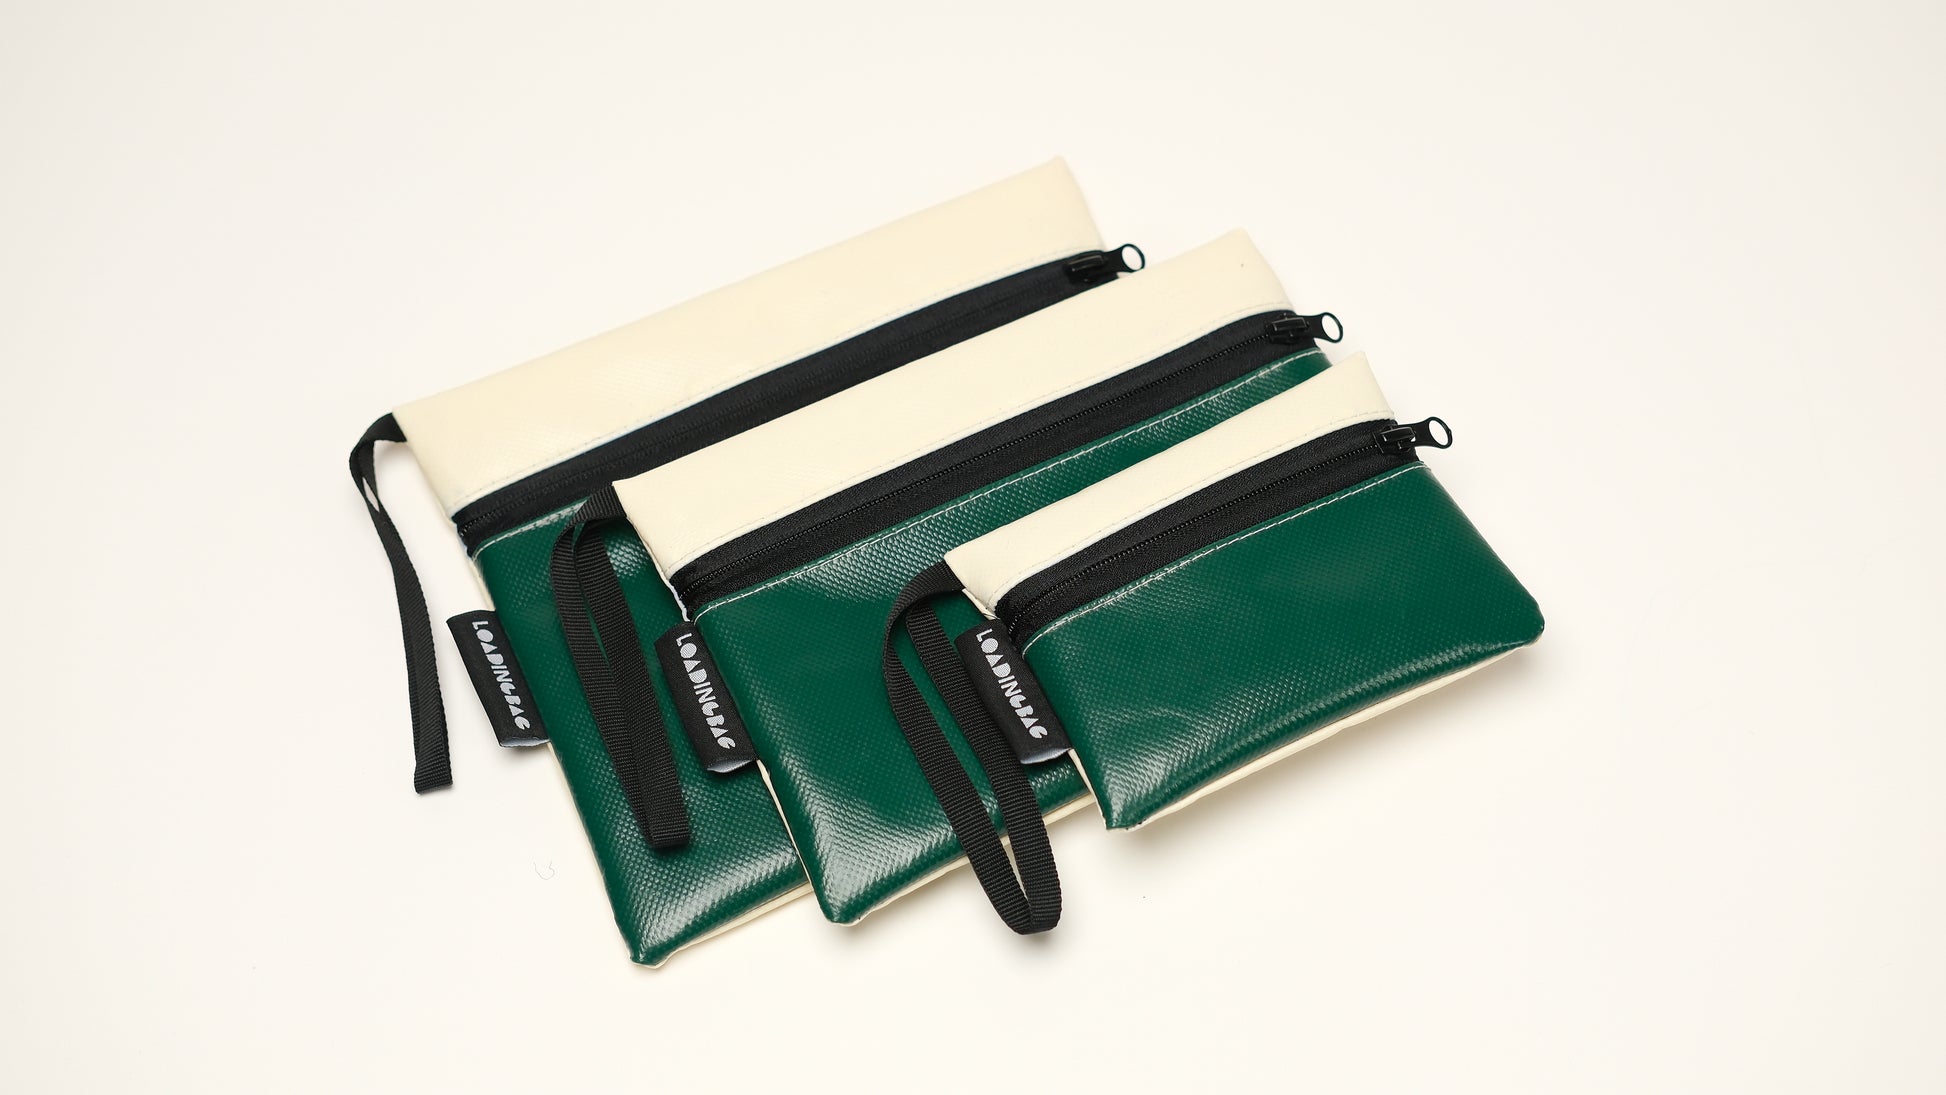 Coin Purse: Compact, colorful, and eco-friendly.  Card Holder: Stylish, durable, and sustainable.  Key Pouch: Secure, stylish, and long-lasting.  Note: Slight color variations may occur due to unique production methods, adding to each piece's uniqueness.  Get your 3 in 1 Accessories Set today! 🌿👜 #SustainableLiving #UpcycledFashion #VersatileStyle